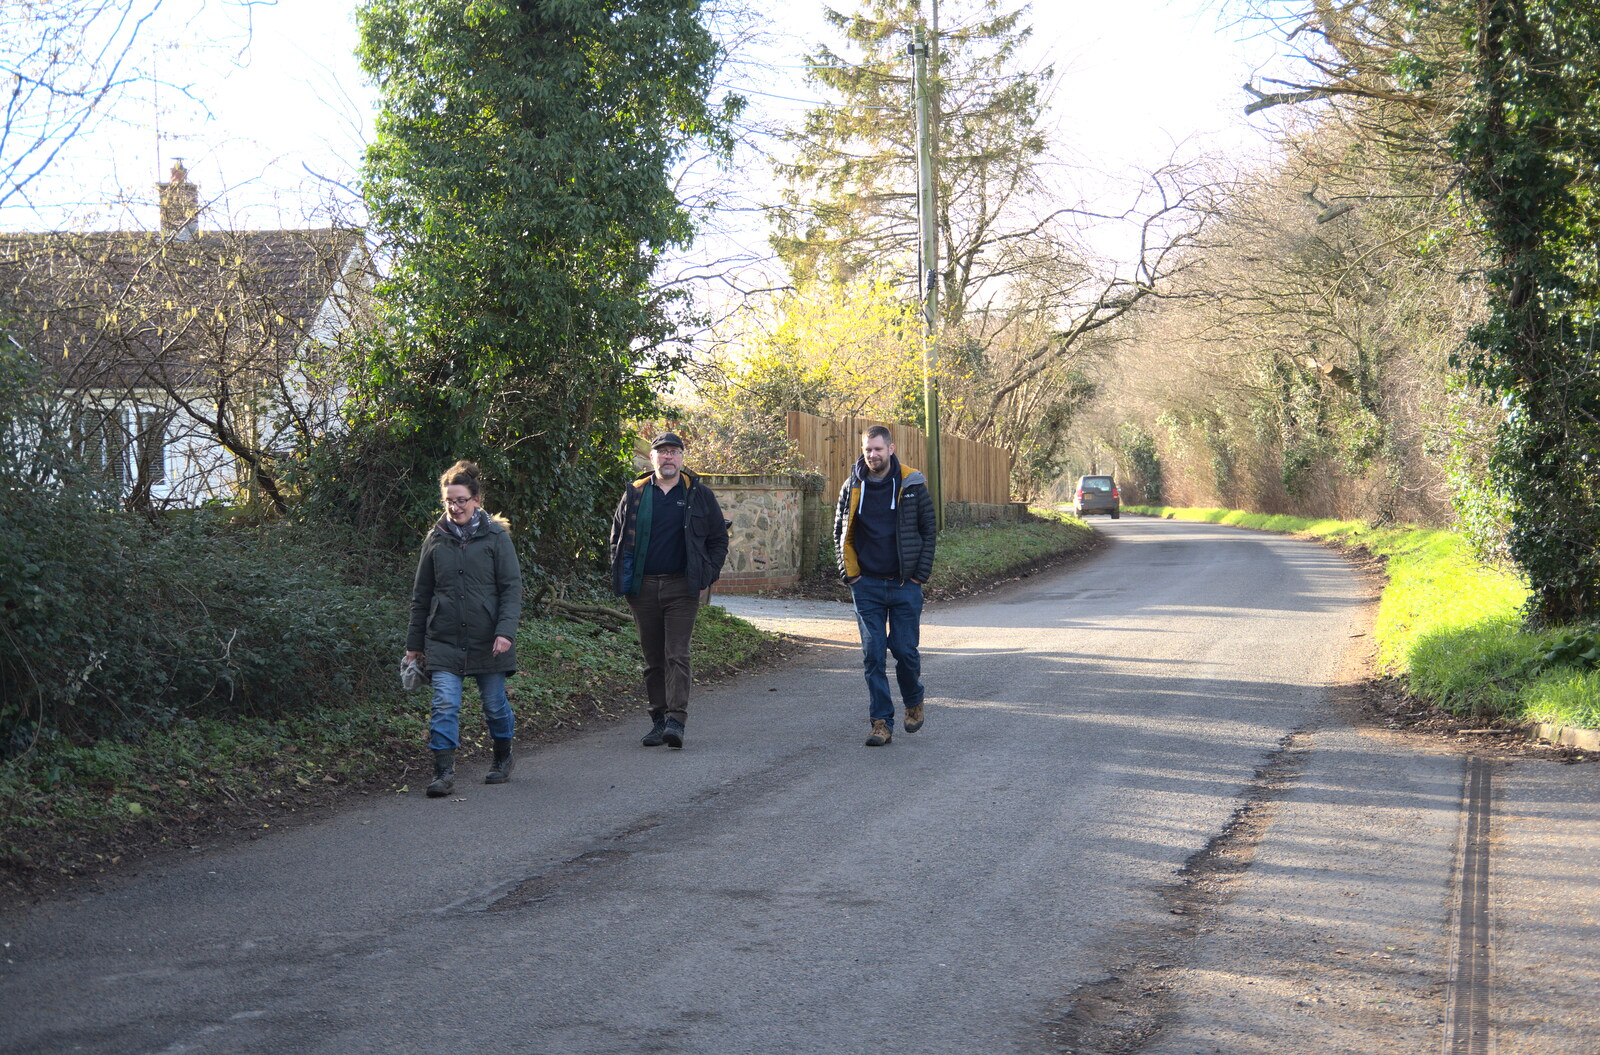 Suey, Marc and The Boy Phil head up the road from Another Walk to The Swan, Hoxne, Suffolk - 5th February 2023